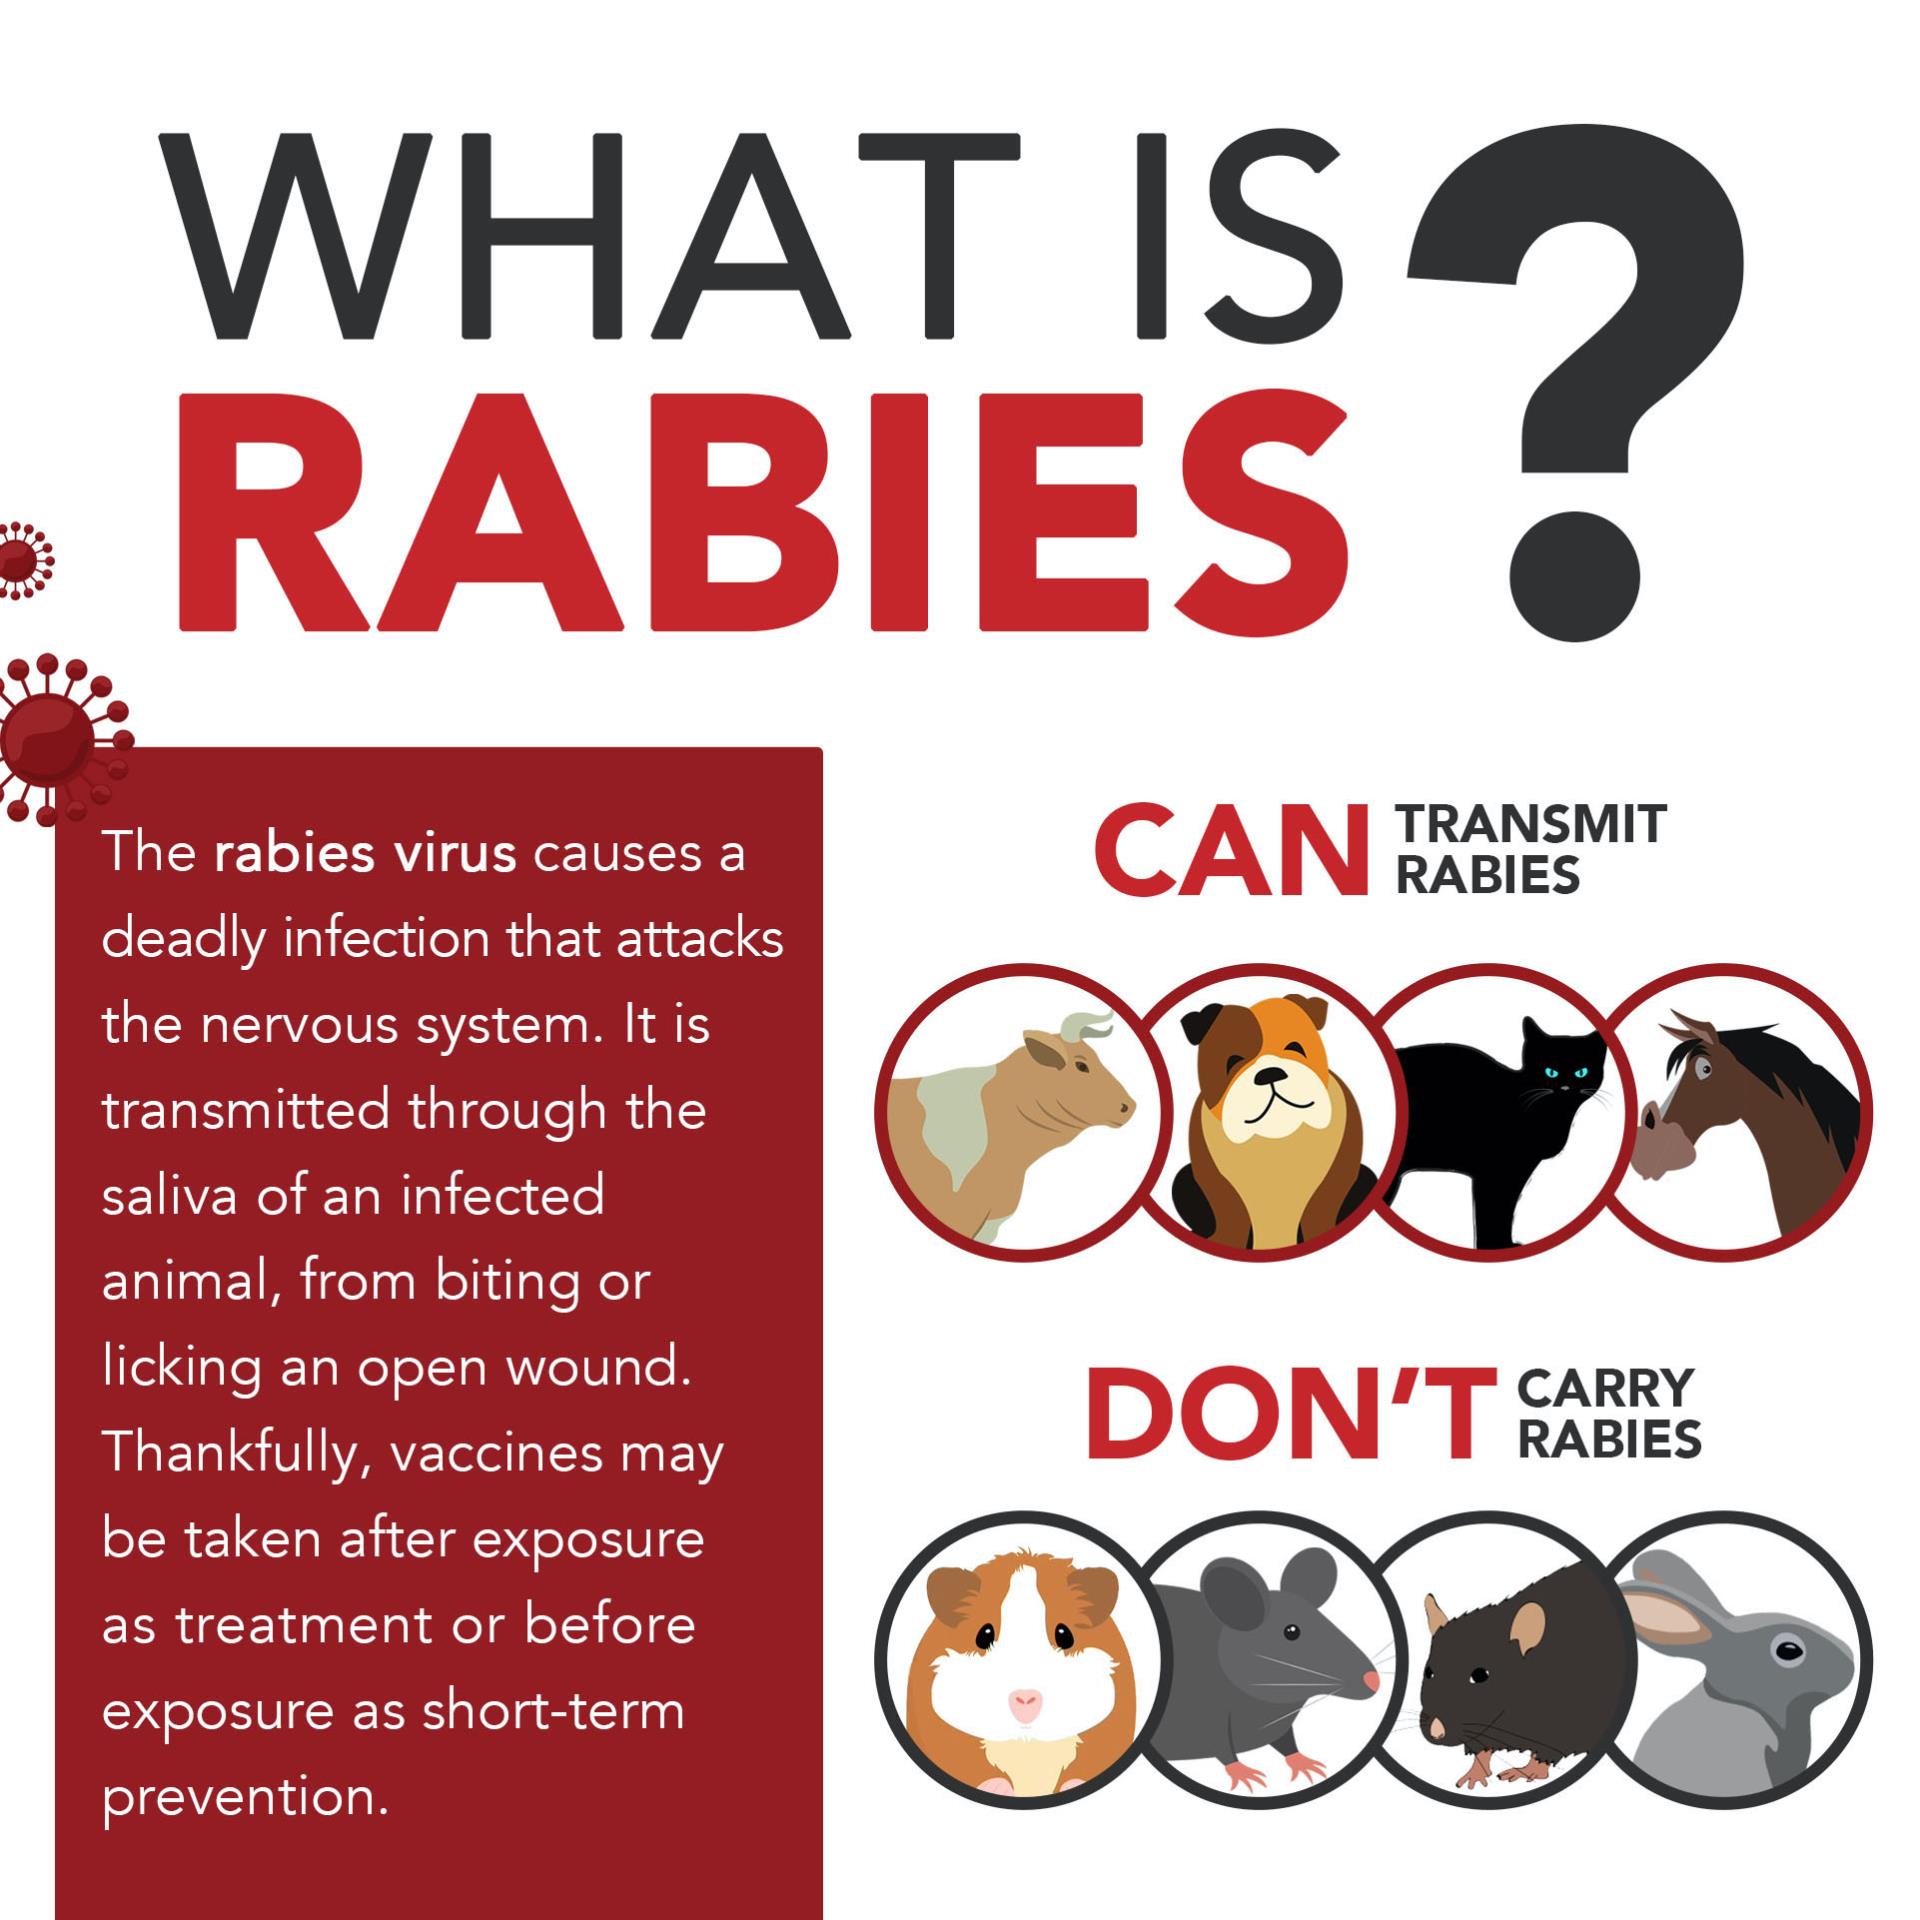 What is Rabies